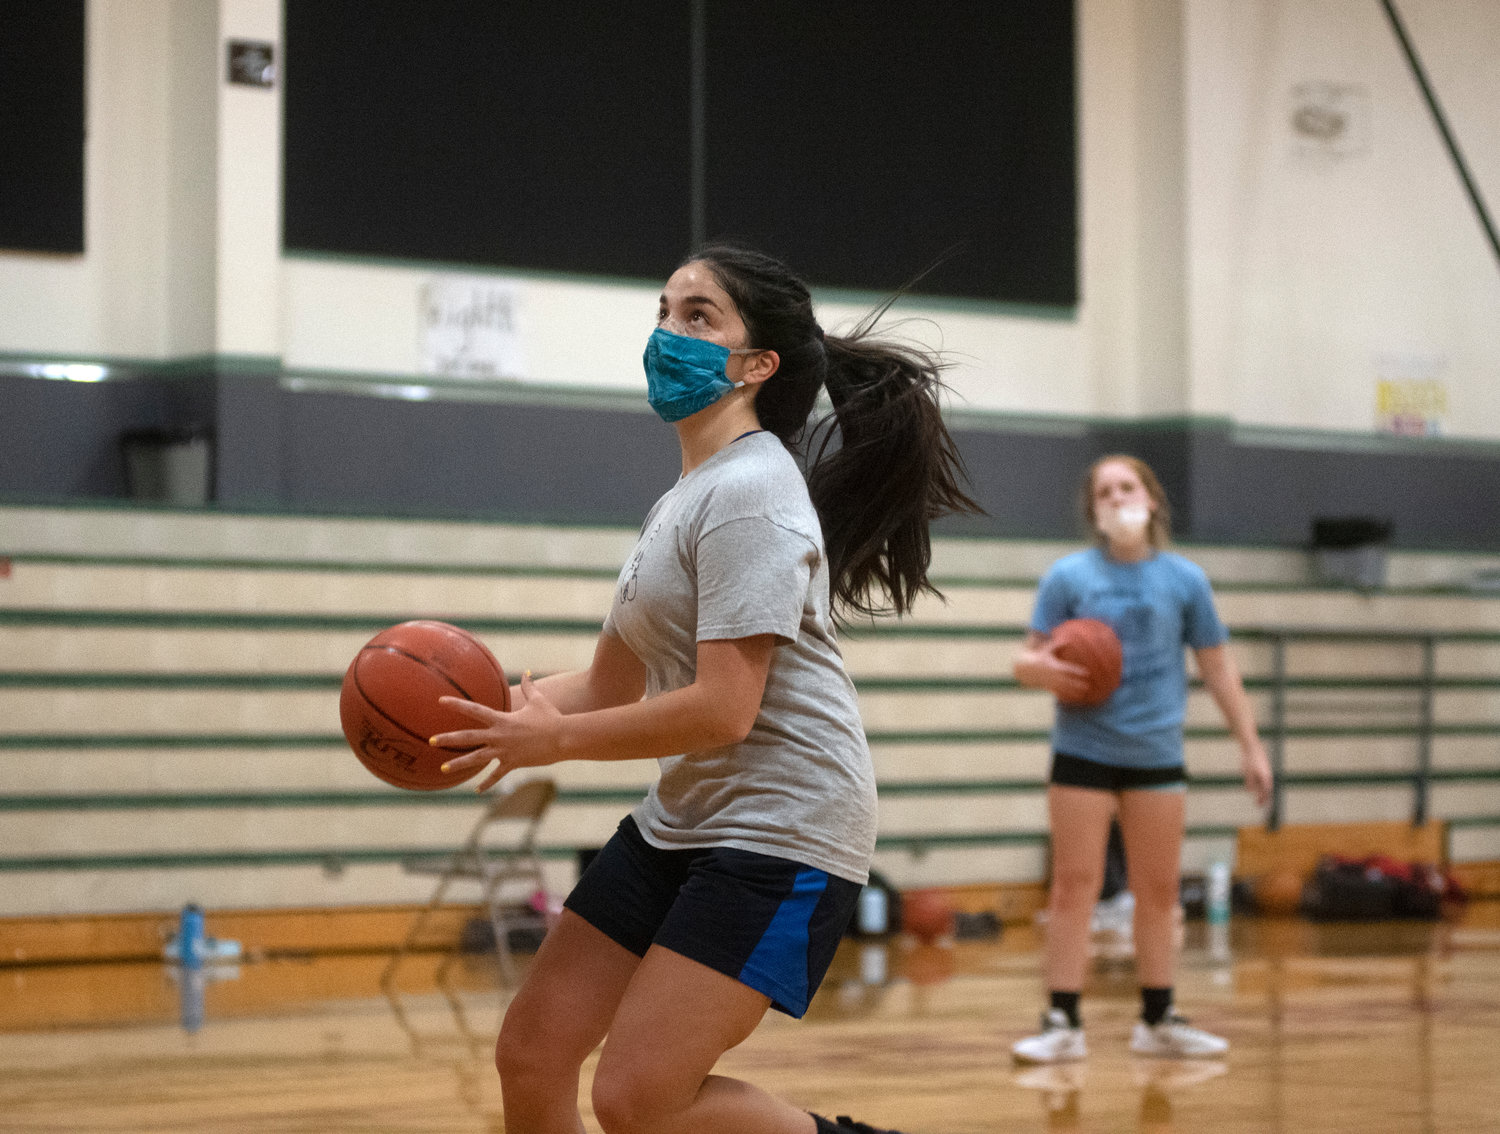 Senior guard Emma Cline-Maier drives for a layup during a drill at Tuesday’s practice.